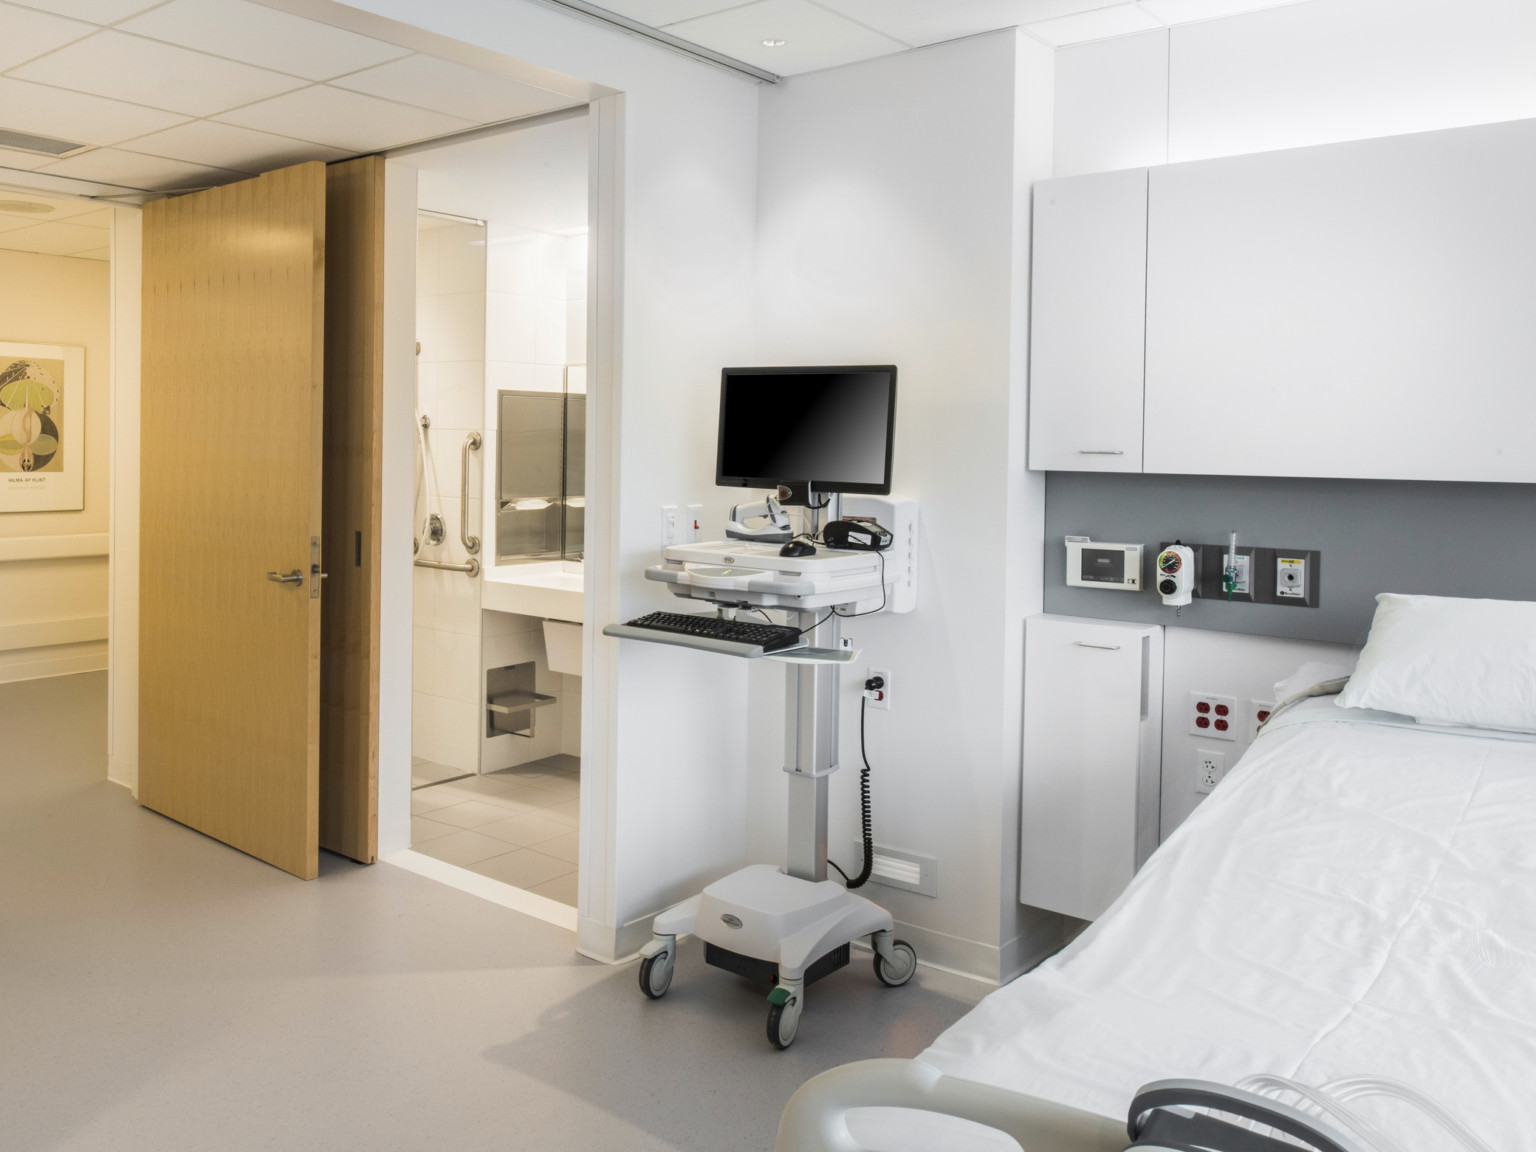 Inside a hospital with door in left corner. Private restroom is right of the door, with flexible workstation between the bed